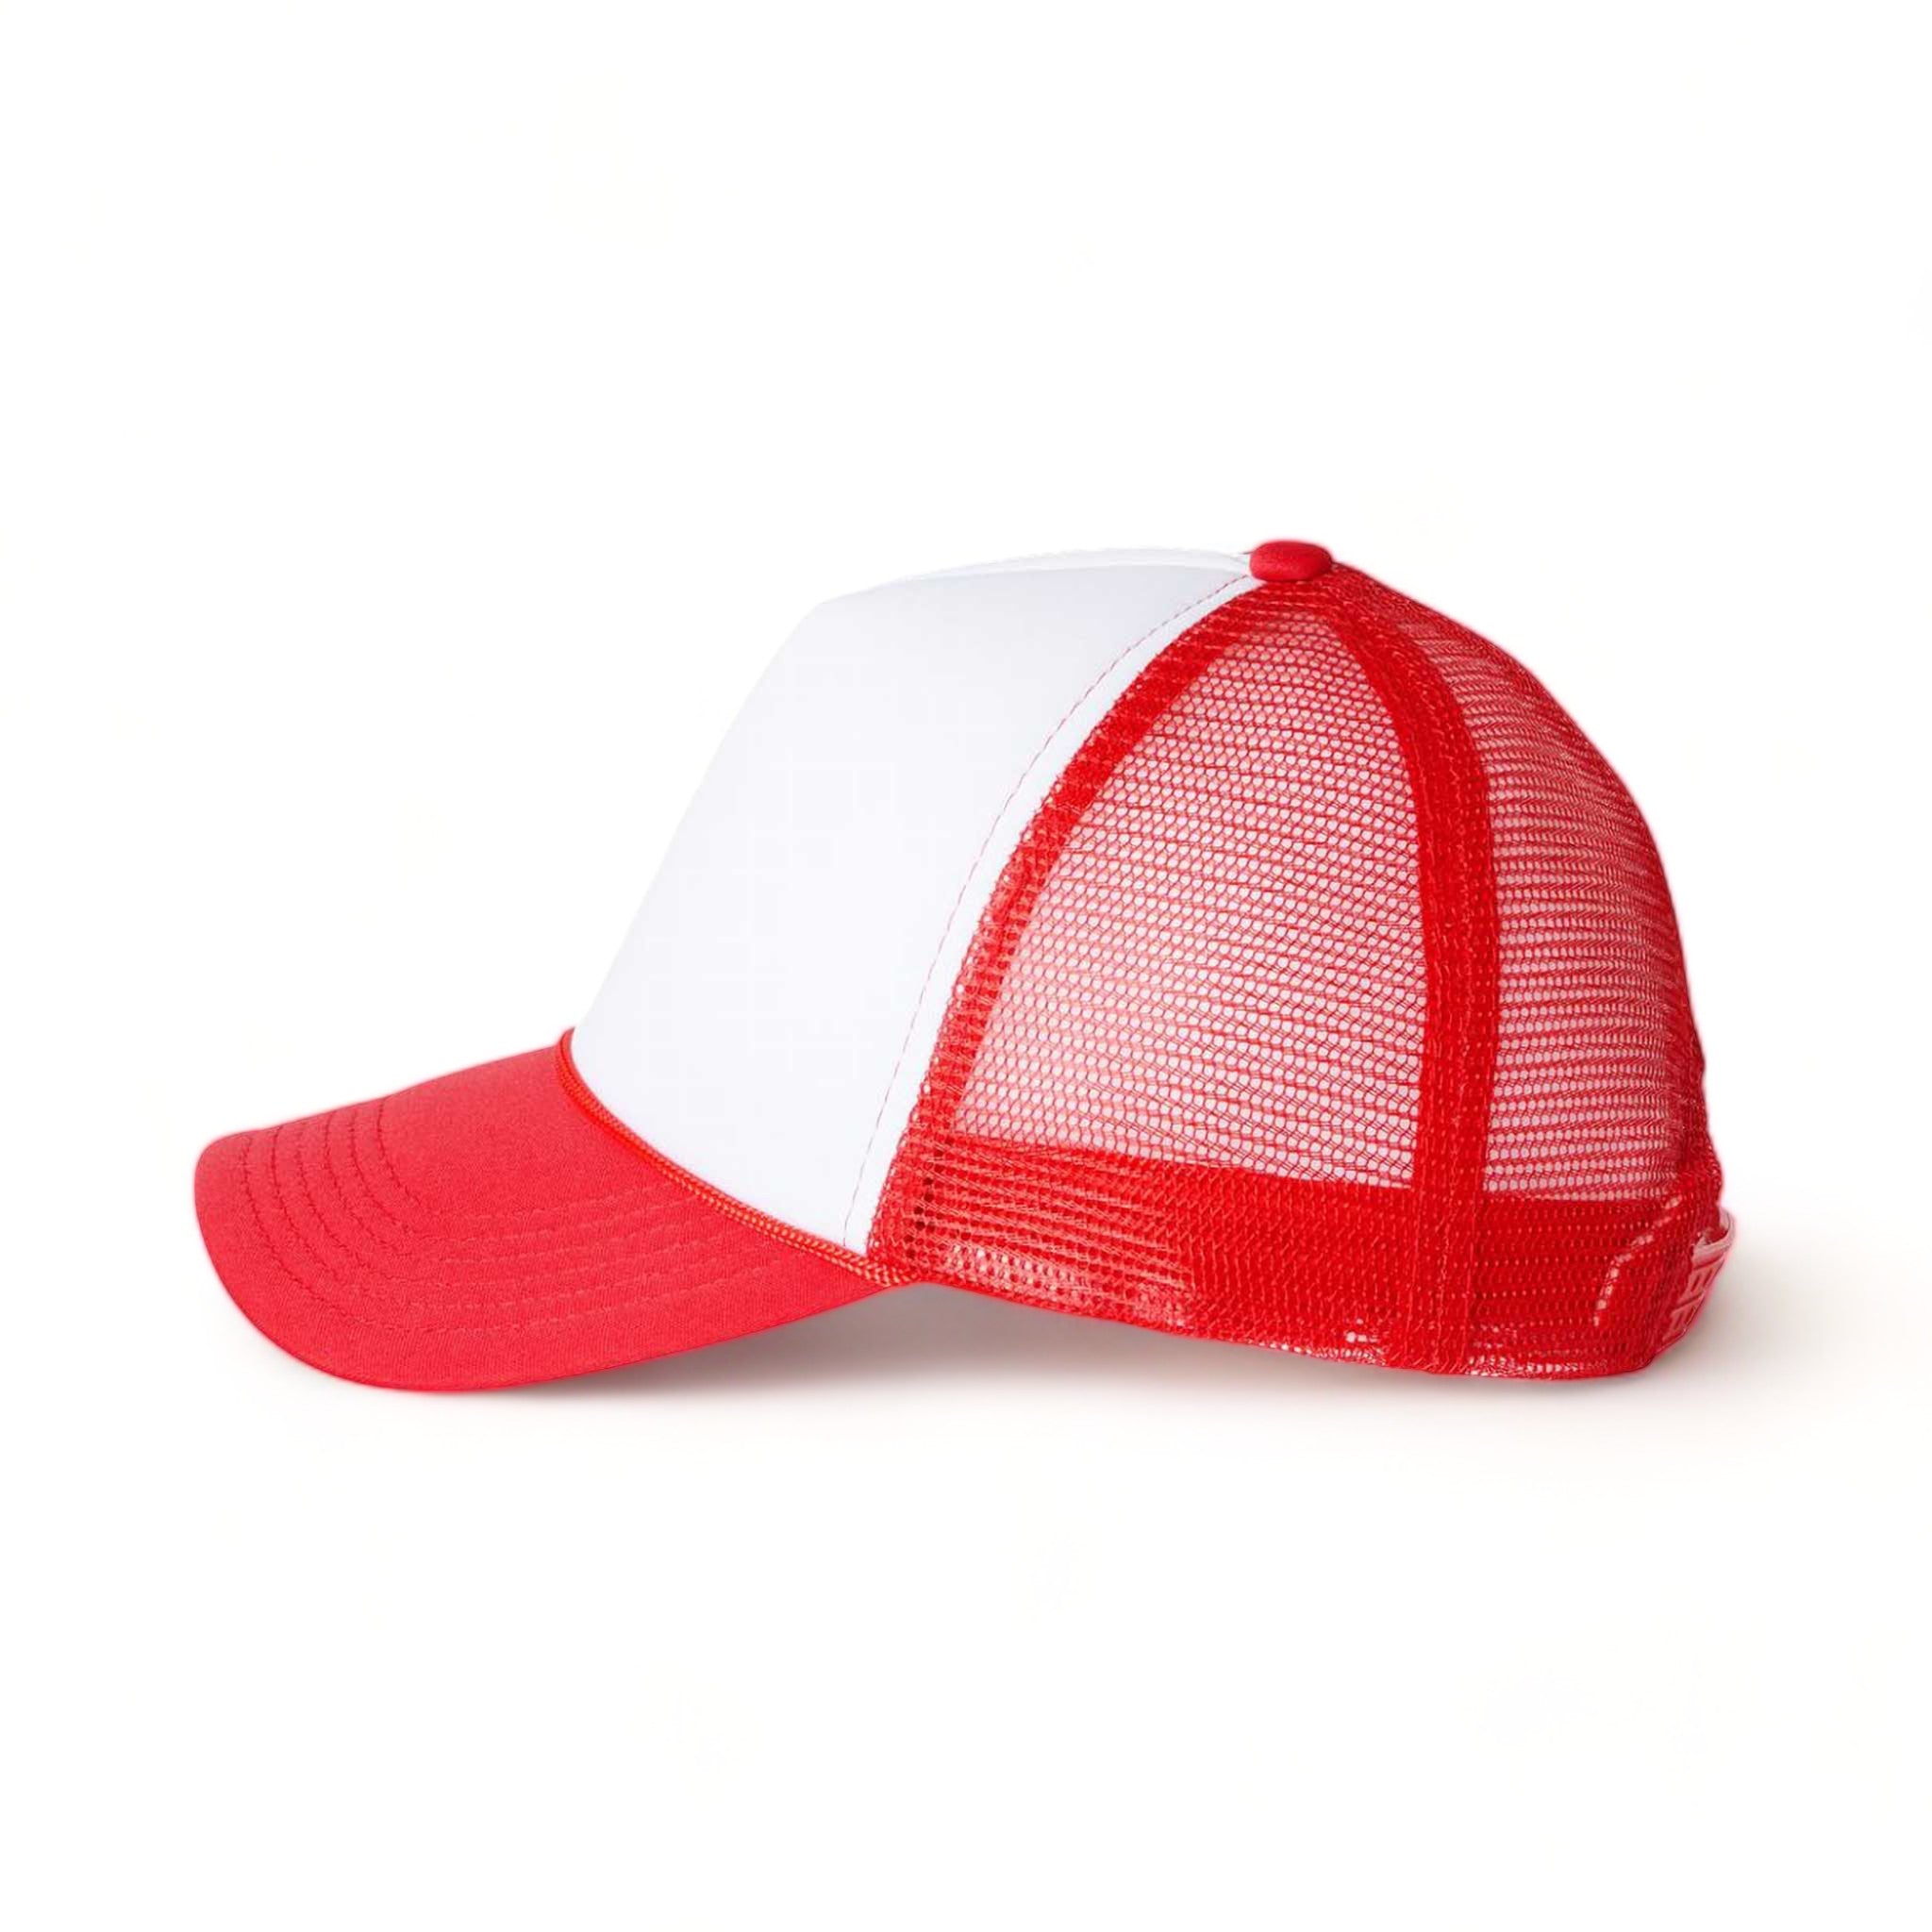 Side view of Valucap VC700 custom hat in white and red